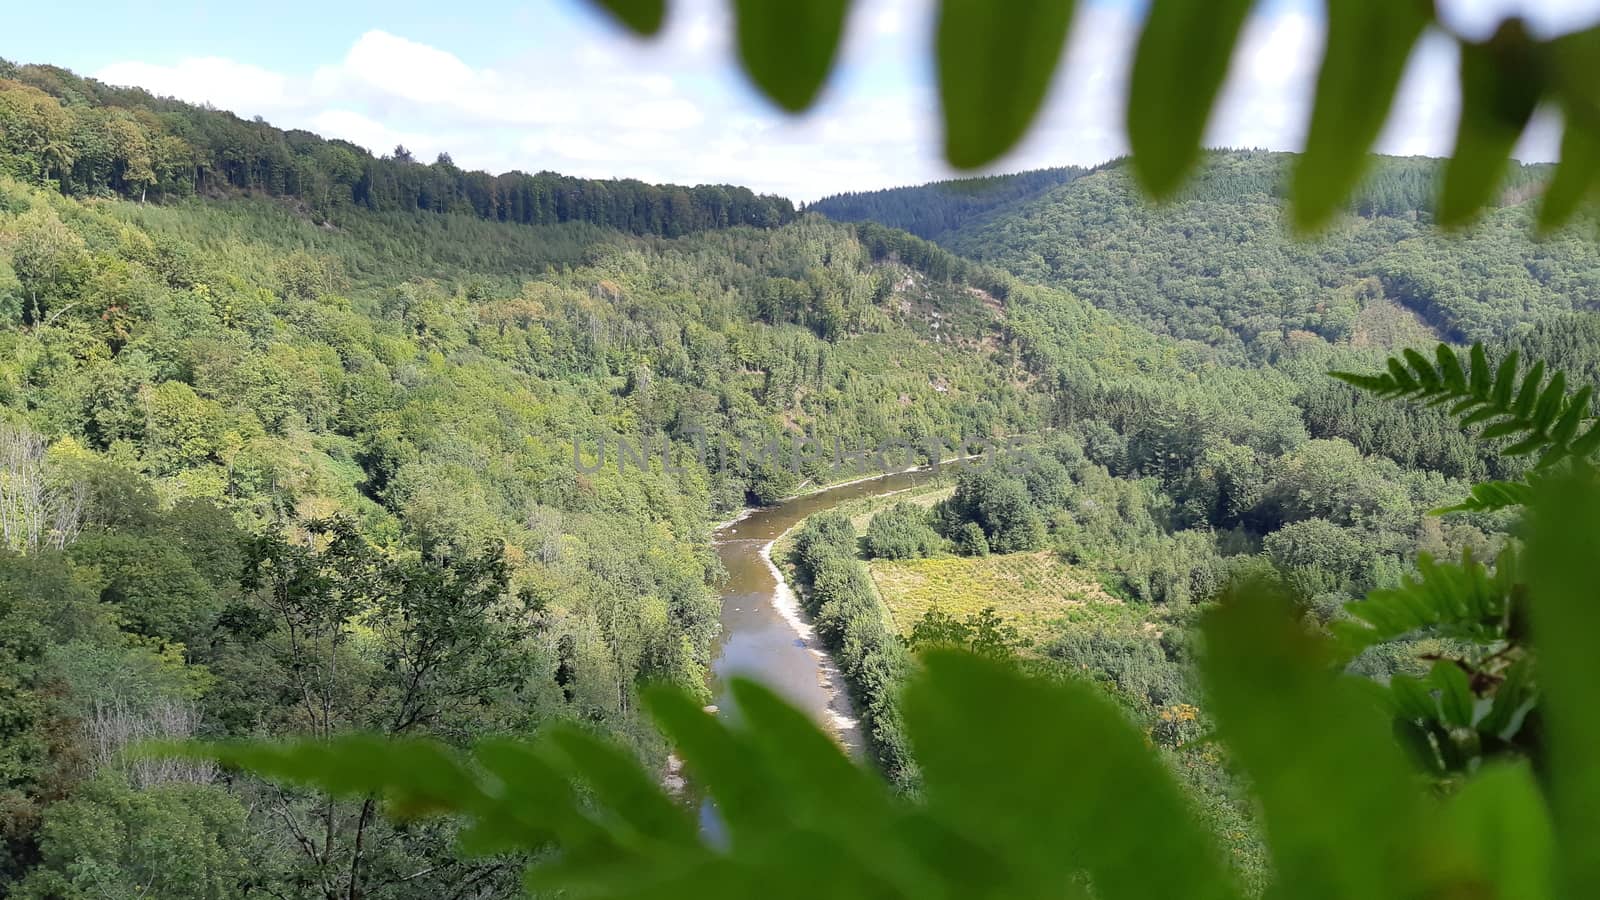 River Semois, Bouillon area, close to Rochehaut, as seen on the Les Echelles or laddertjeswandeling hike. Nature and landscape in Wallonia, Belgium